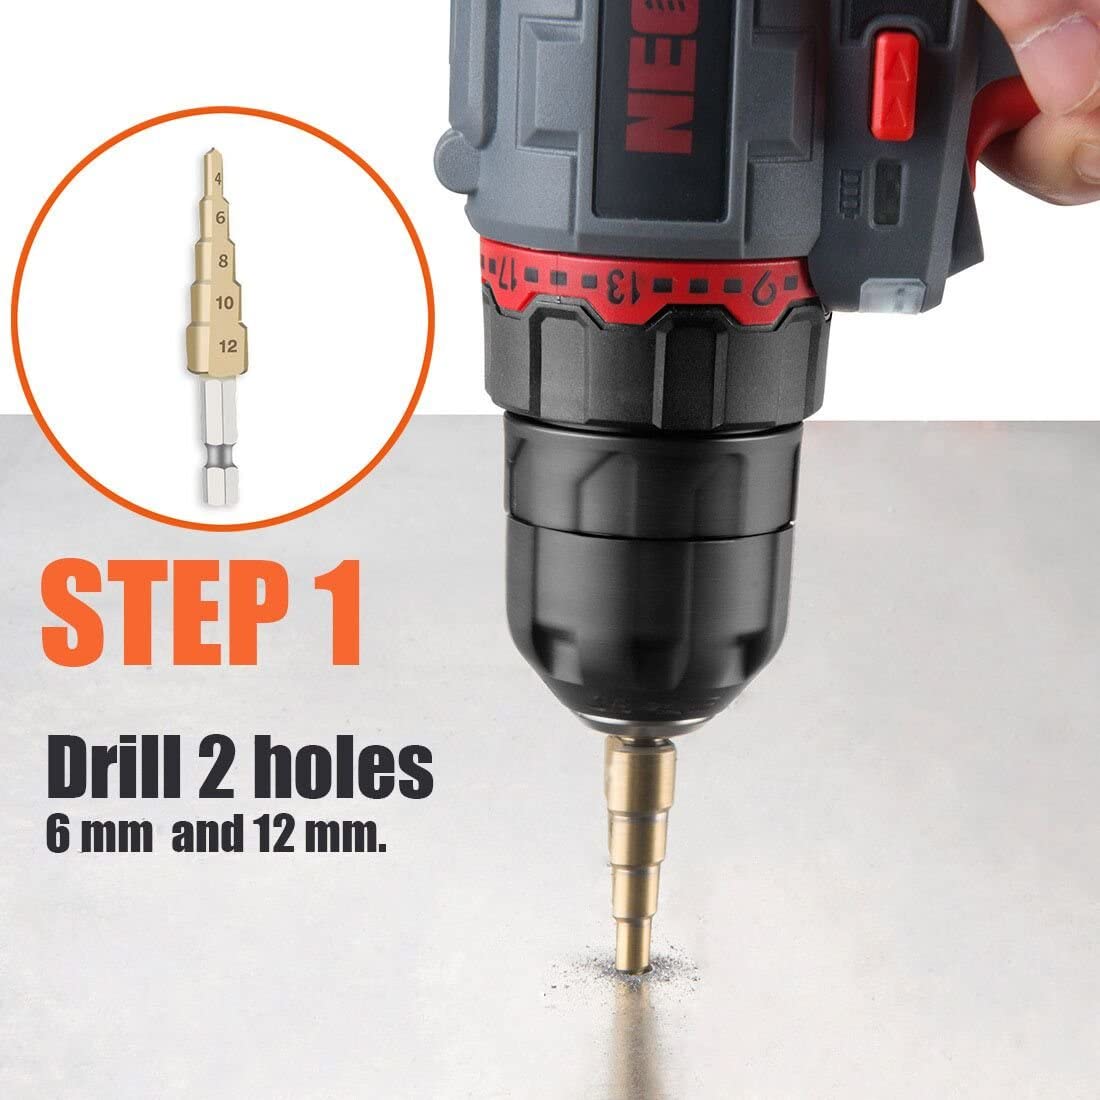 Double-Headed-Sheet-Metal-Nibbler-Cutter-Drill-Attachment-Nibbler-for-360-Degree-Rotatable-Circle-Cu-1900755-1